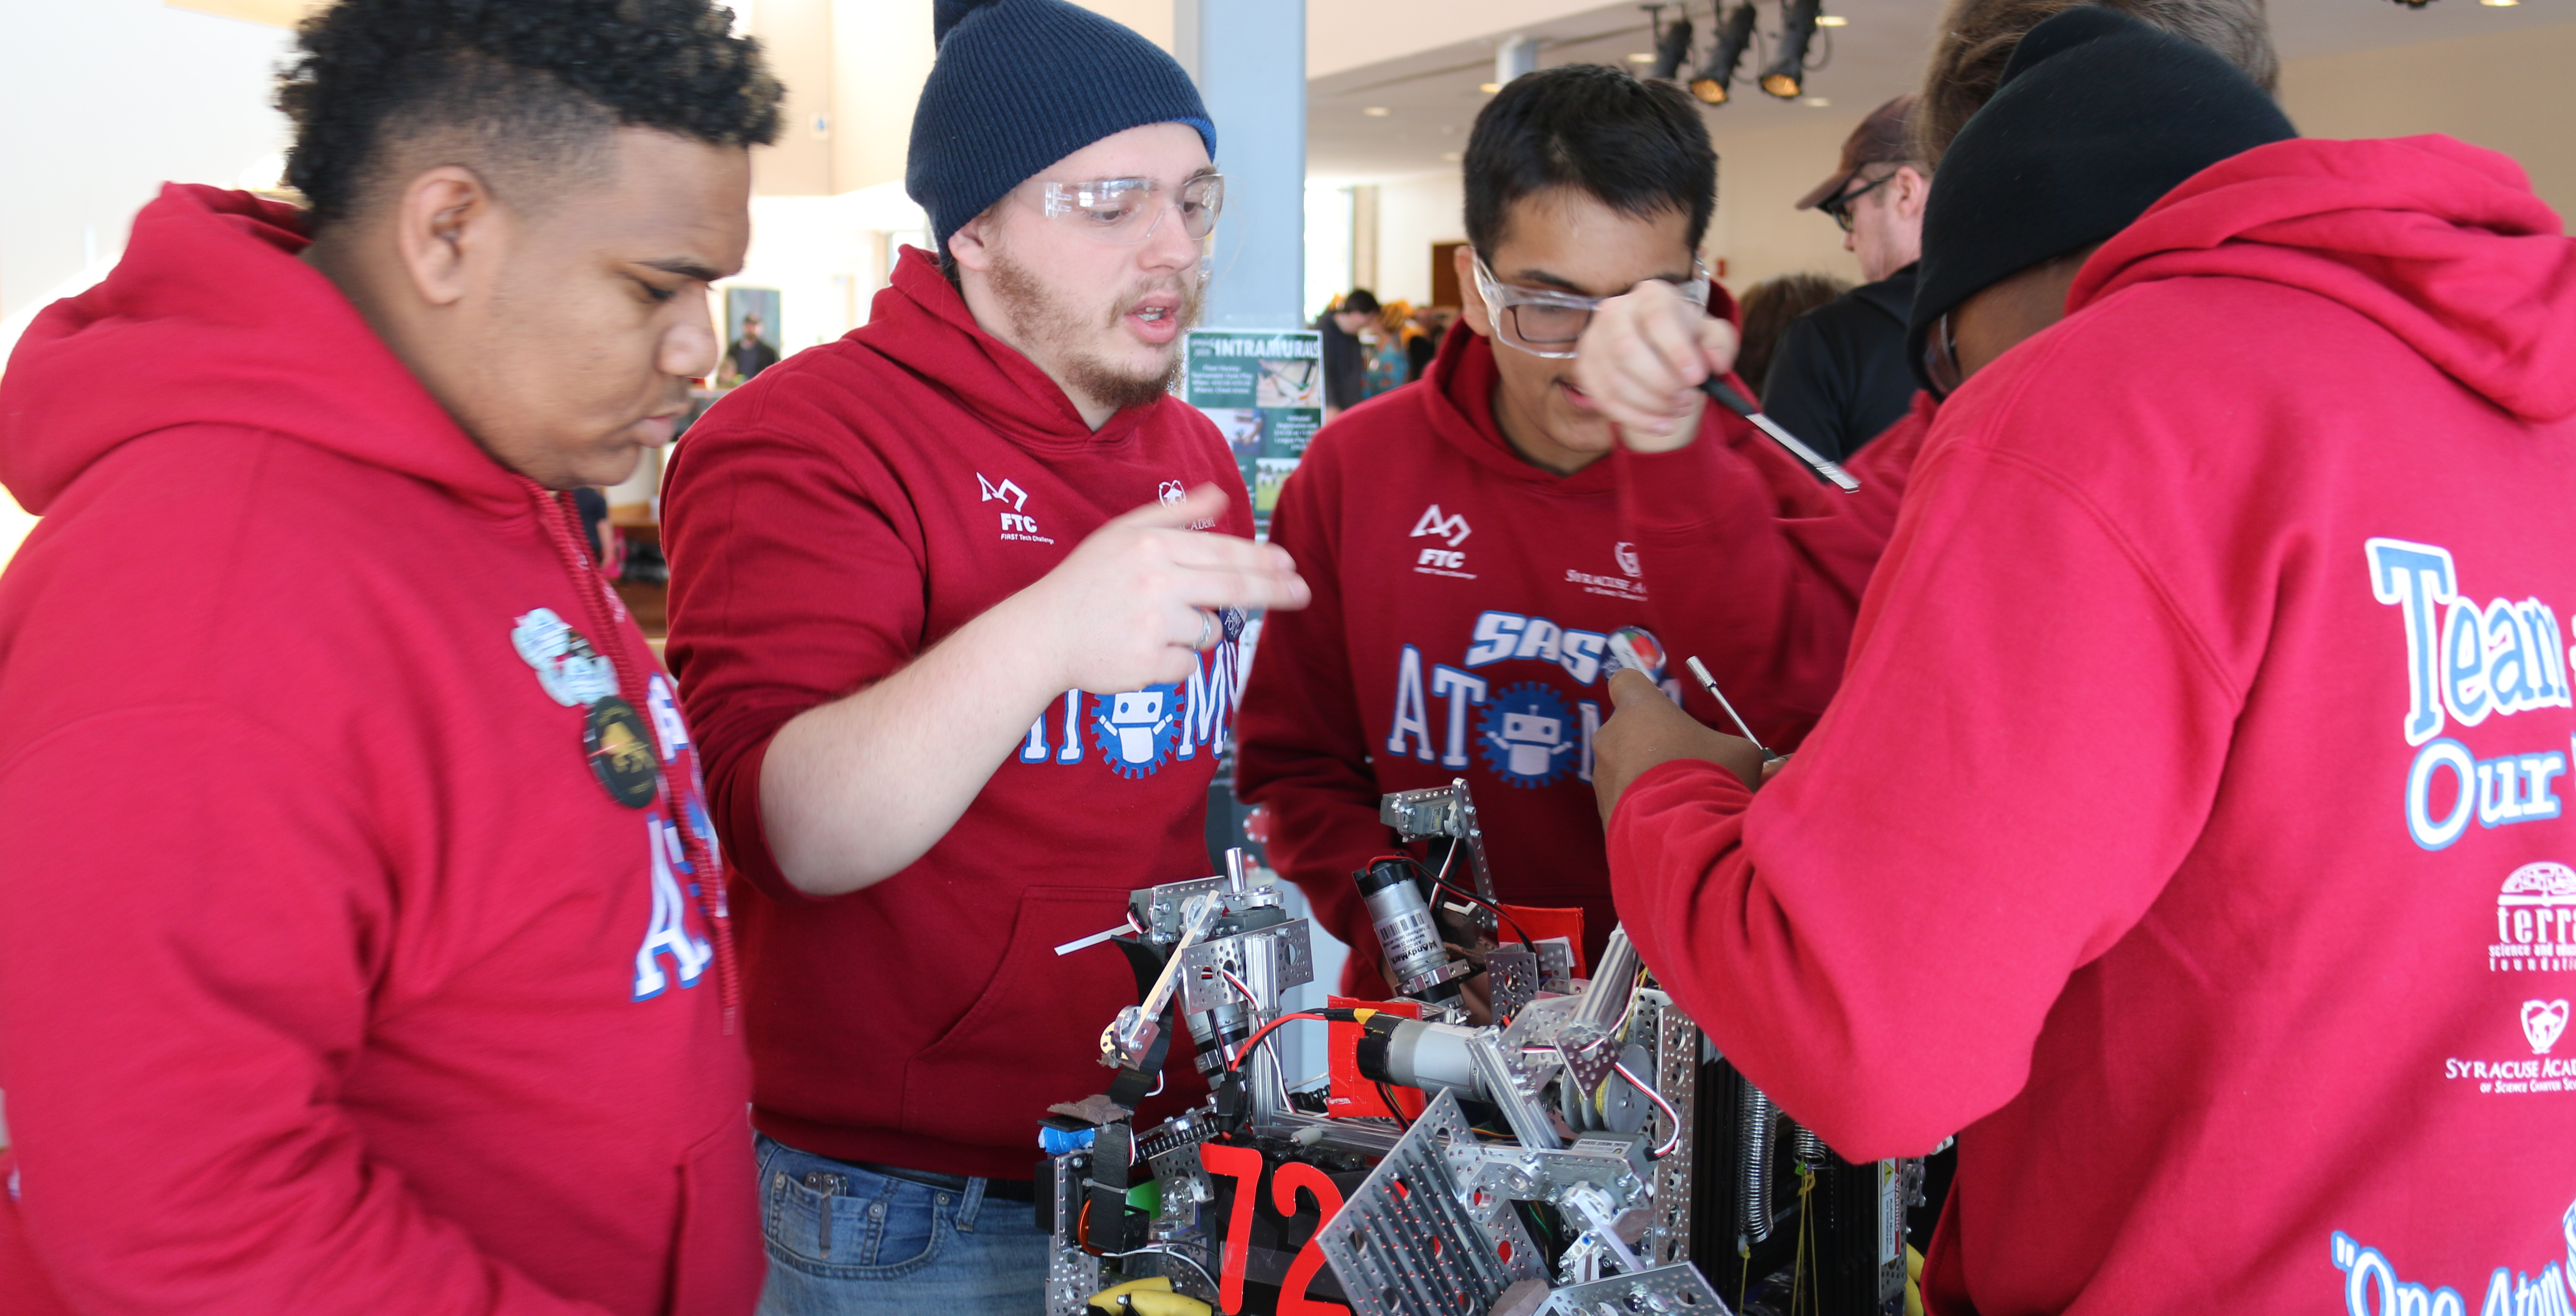 Syracuse Academy of Science Robotics Team Competes During the First Tech Challenge Qualifying Tournament.